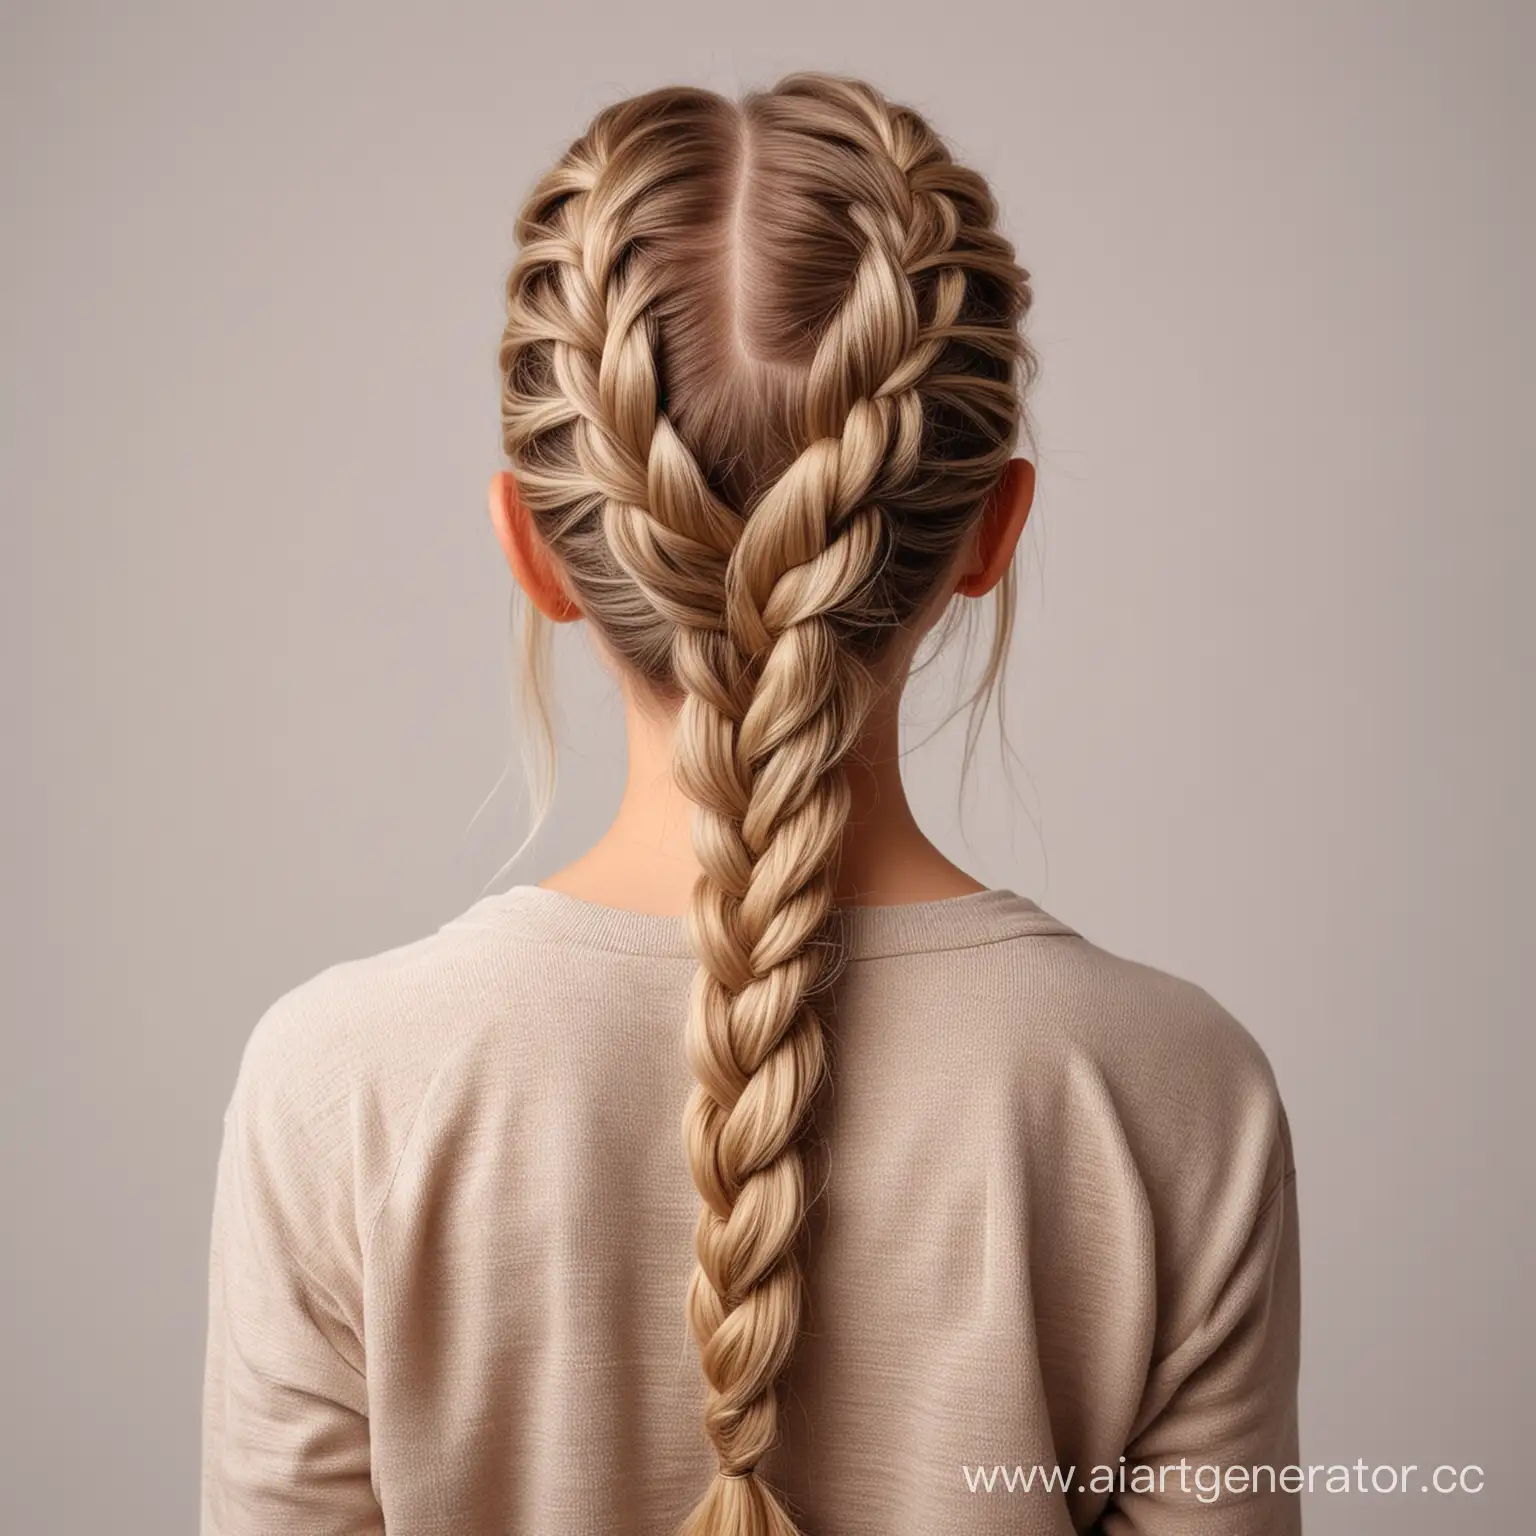 Girl-with-Braided-Hair-Standing-Against-LightColored-Background